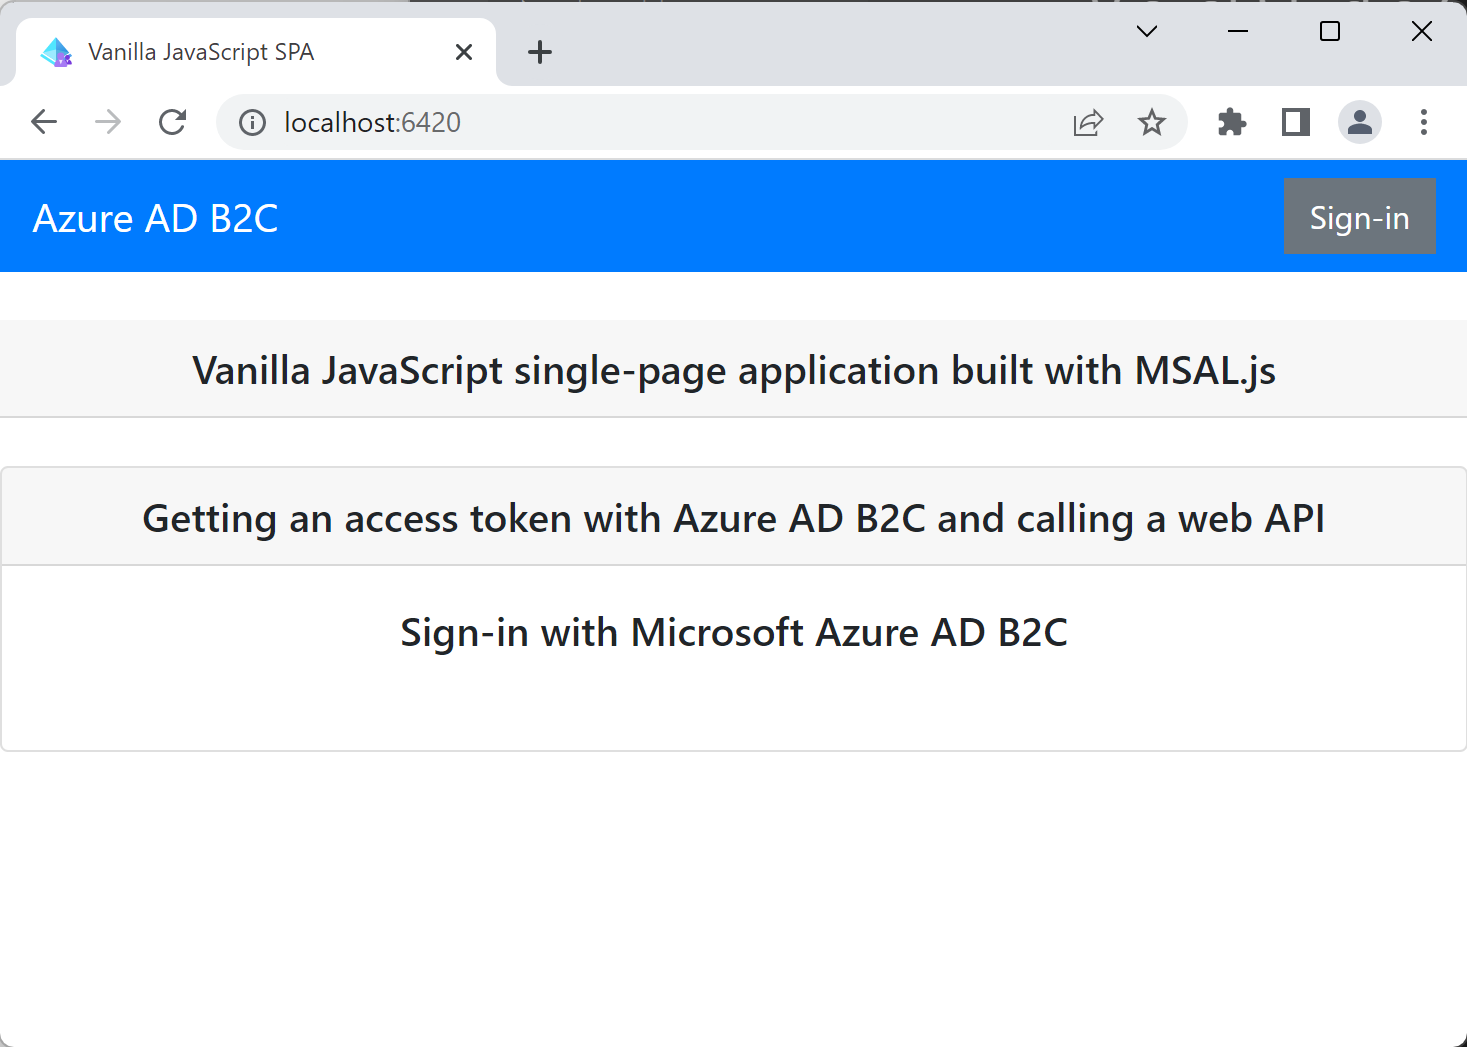 Screenshot of single-page application sample app shown in browser window.